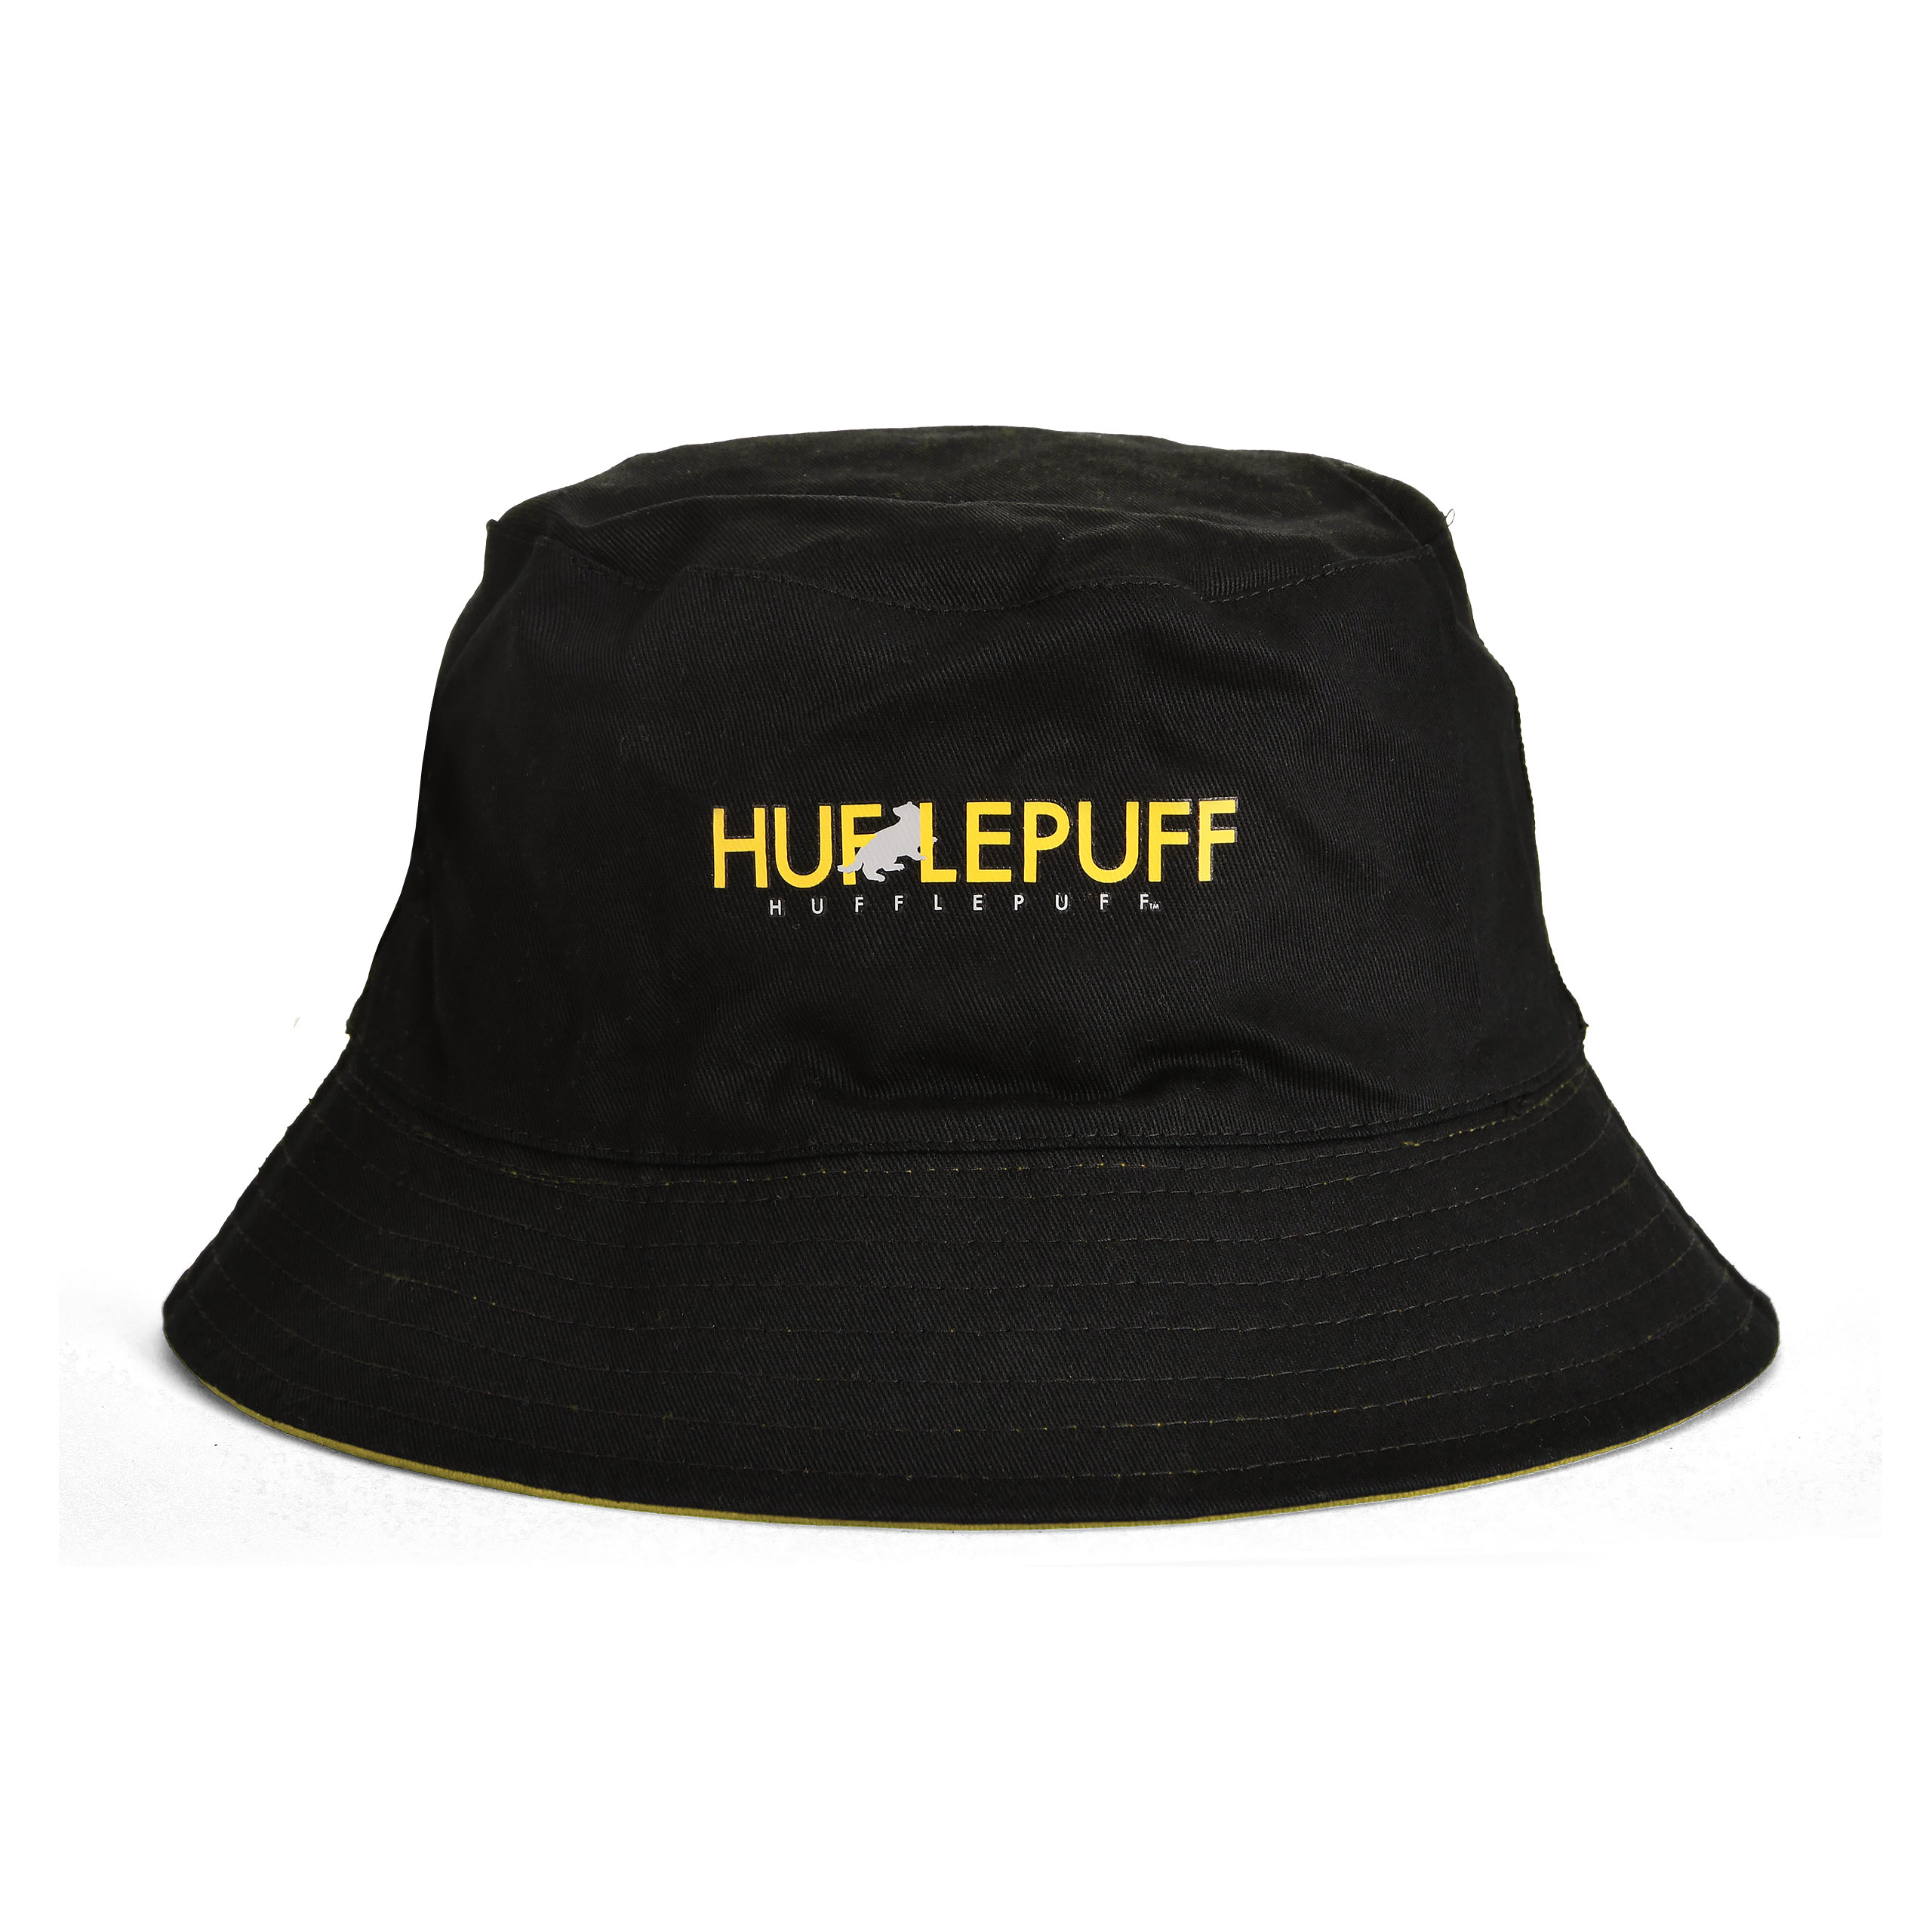 Hufflepuff Crest Hat with Reversible Motif - Harry Potter